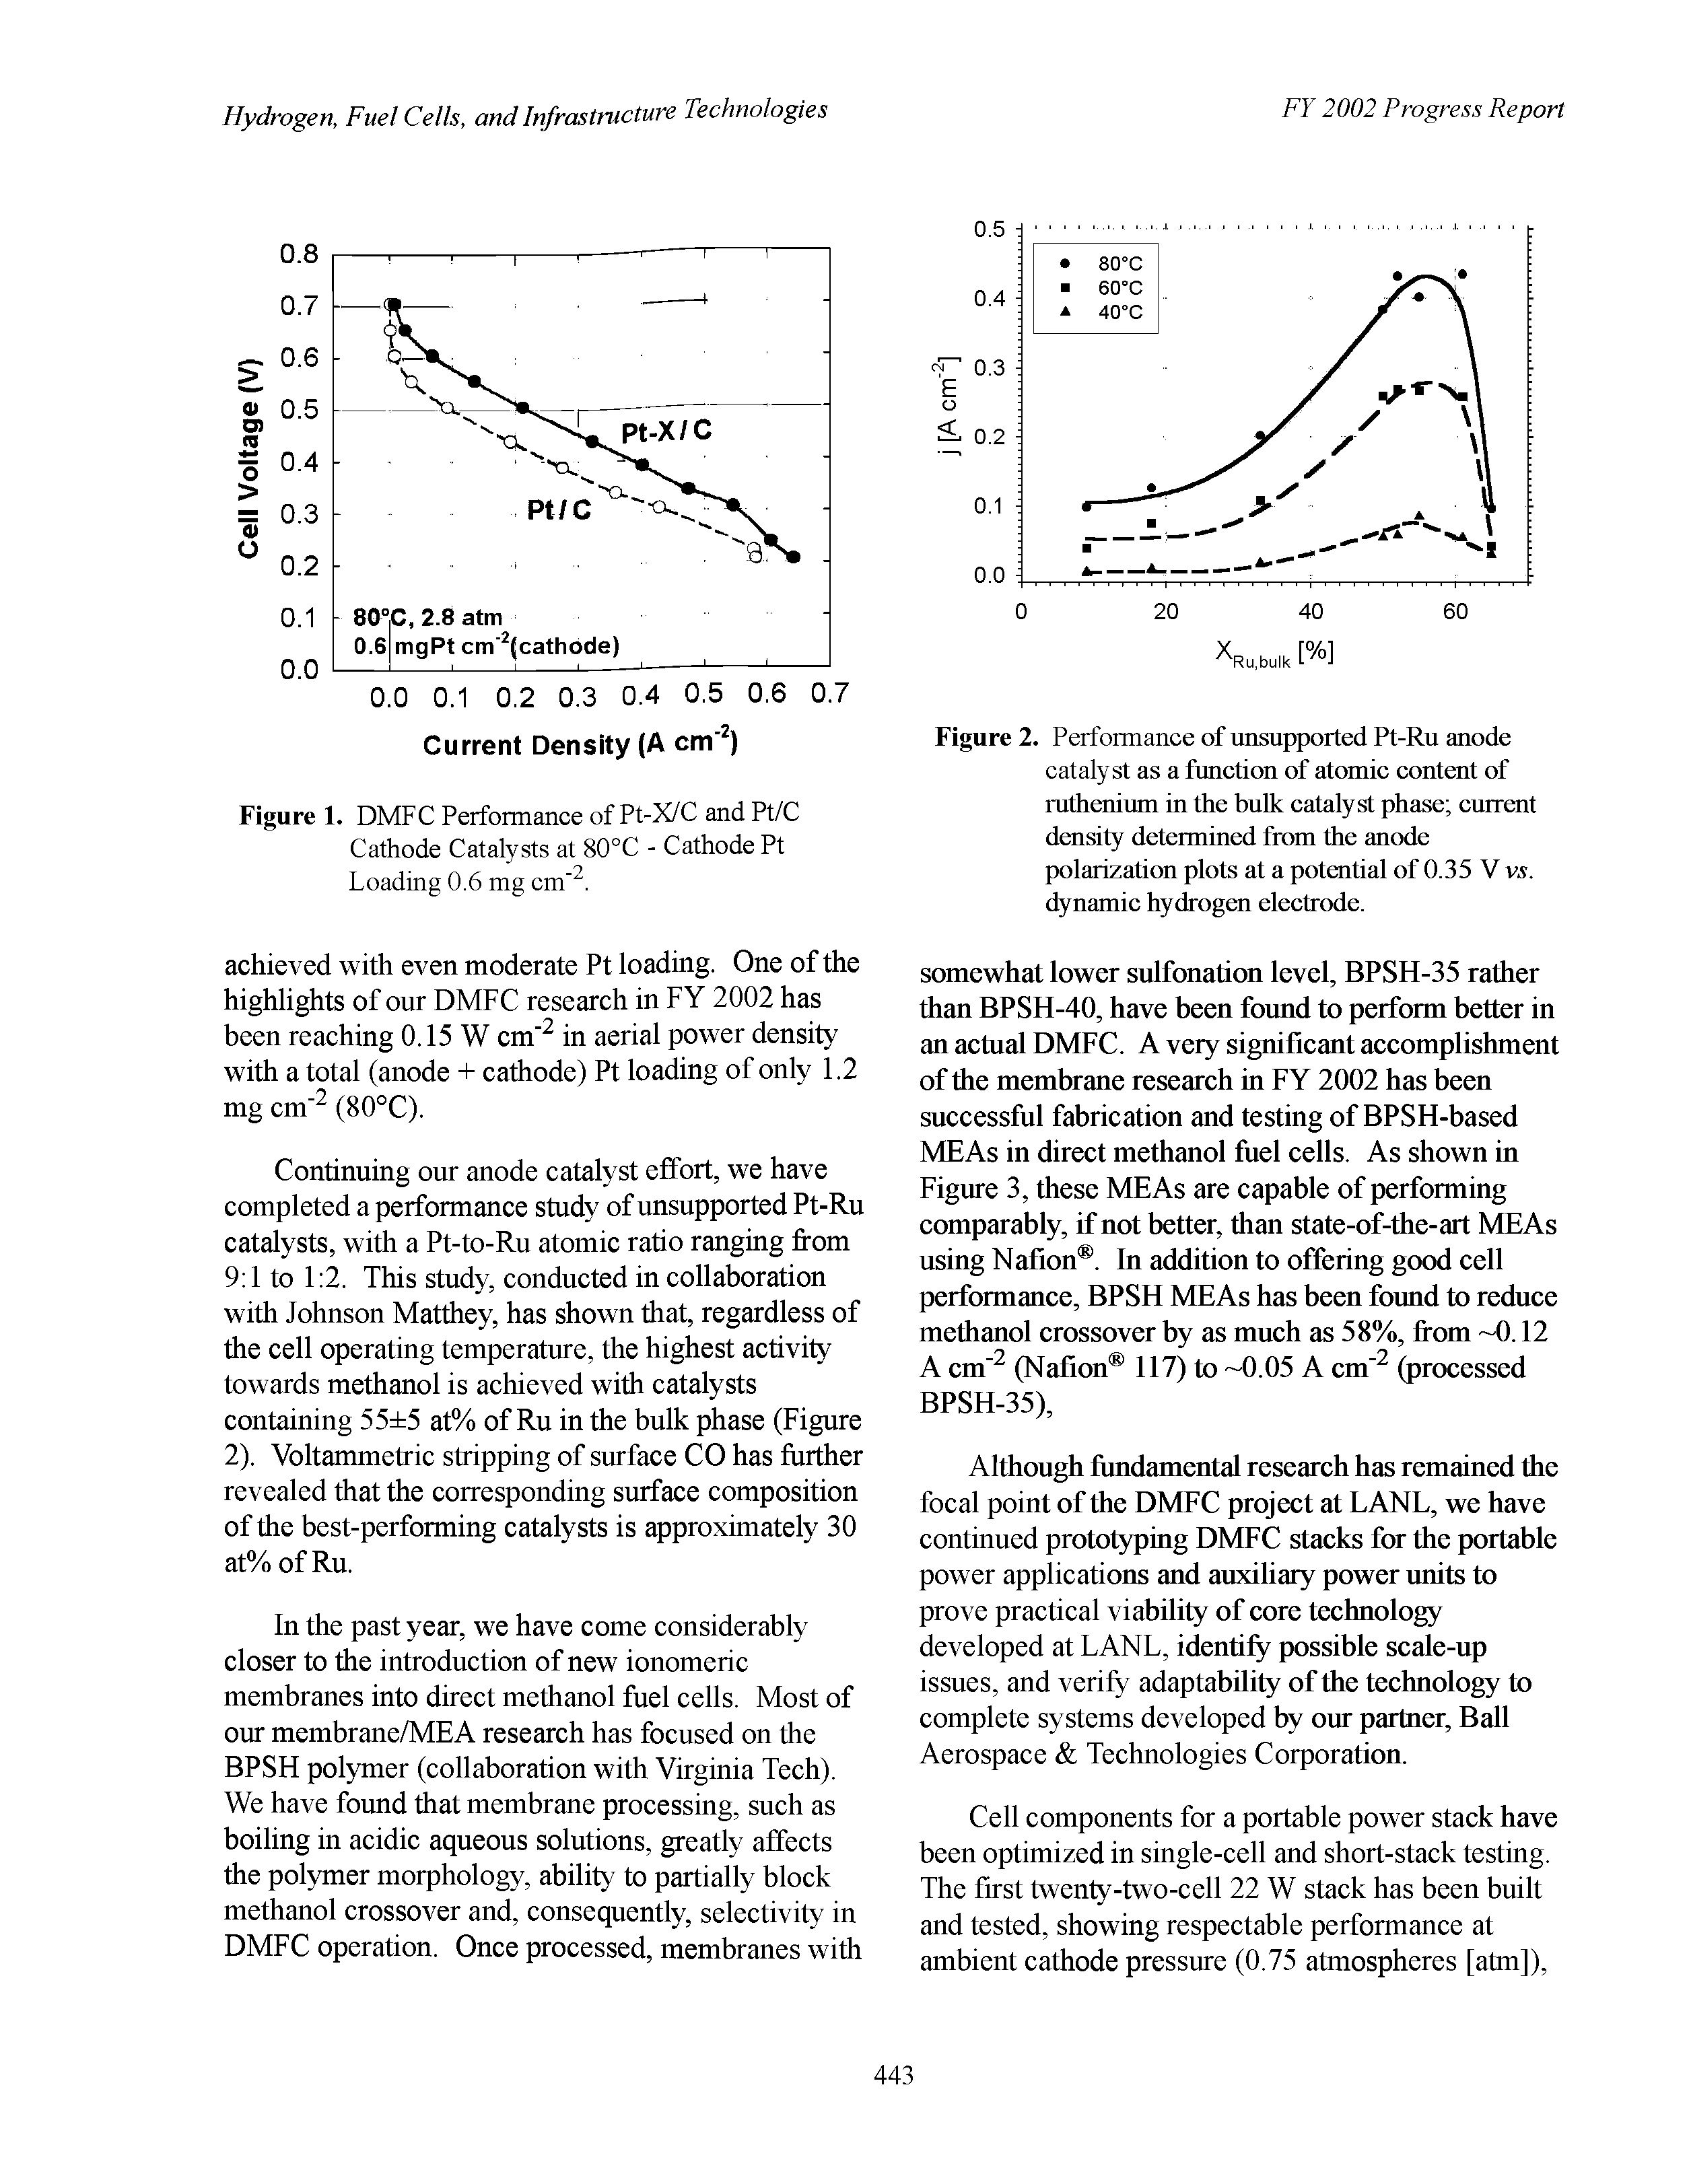 Figure 2. Performance of unsupported Pt-Ru anode catalyst as a function of atomic content of ruthenium in the bulk catalyst phase current density determined from the anode polarization plots at a potential of 0.35 V v . dynamic hydrogen electrode.